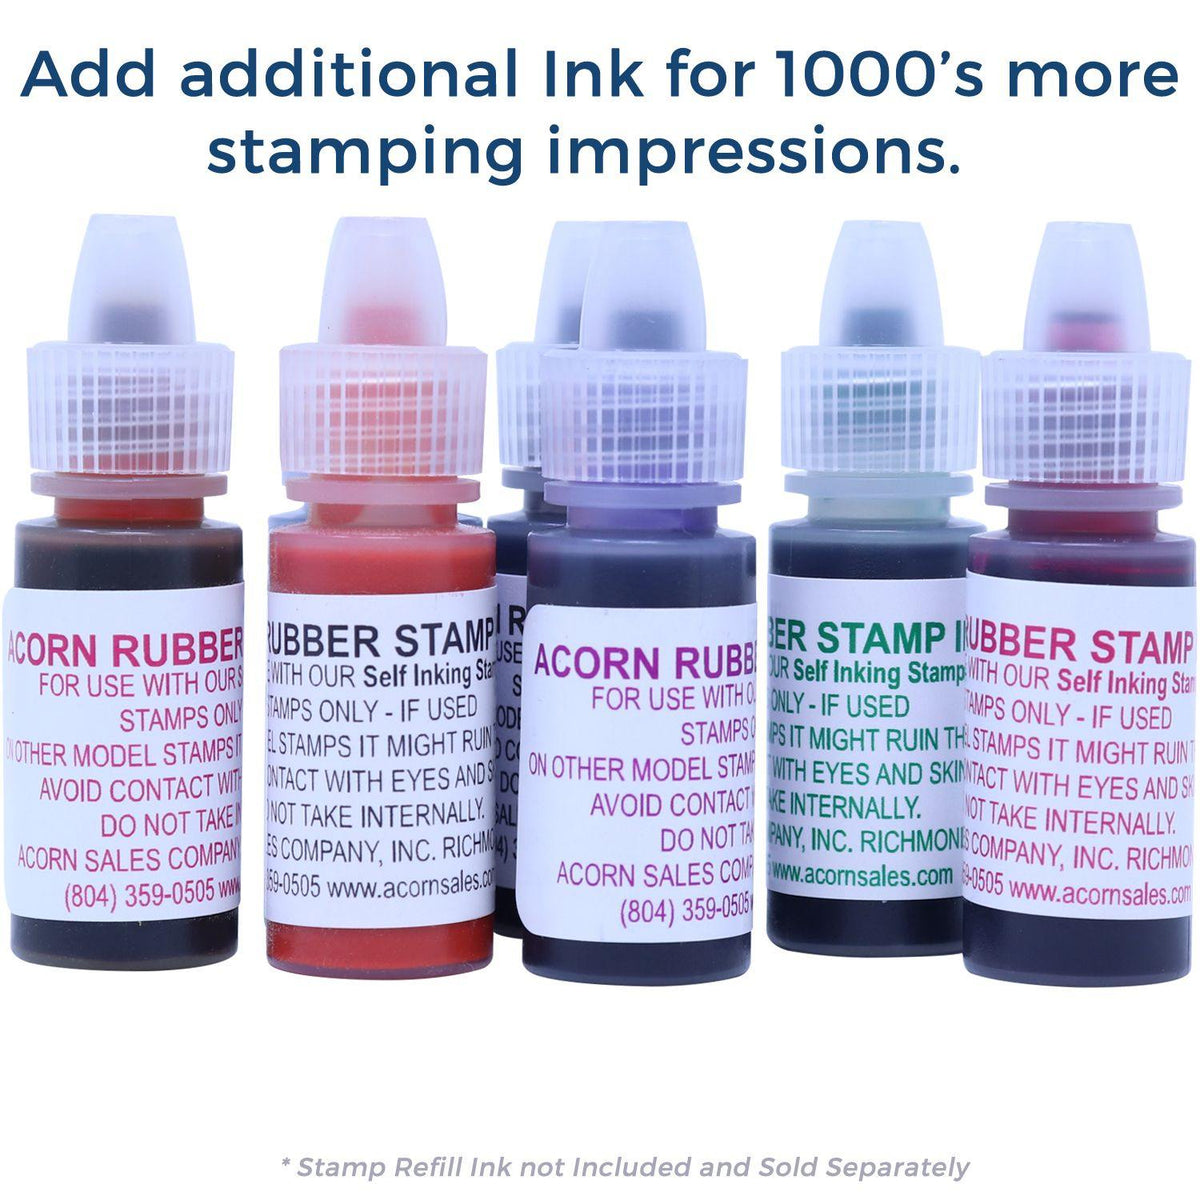 Refill Inks for Large Pre Inked Creditors Exhibit Stamp Available